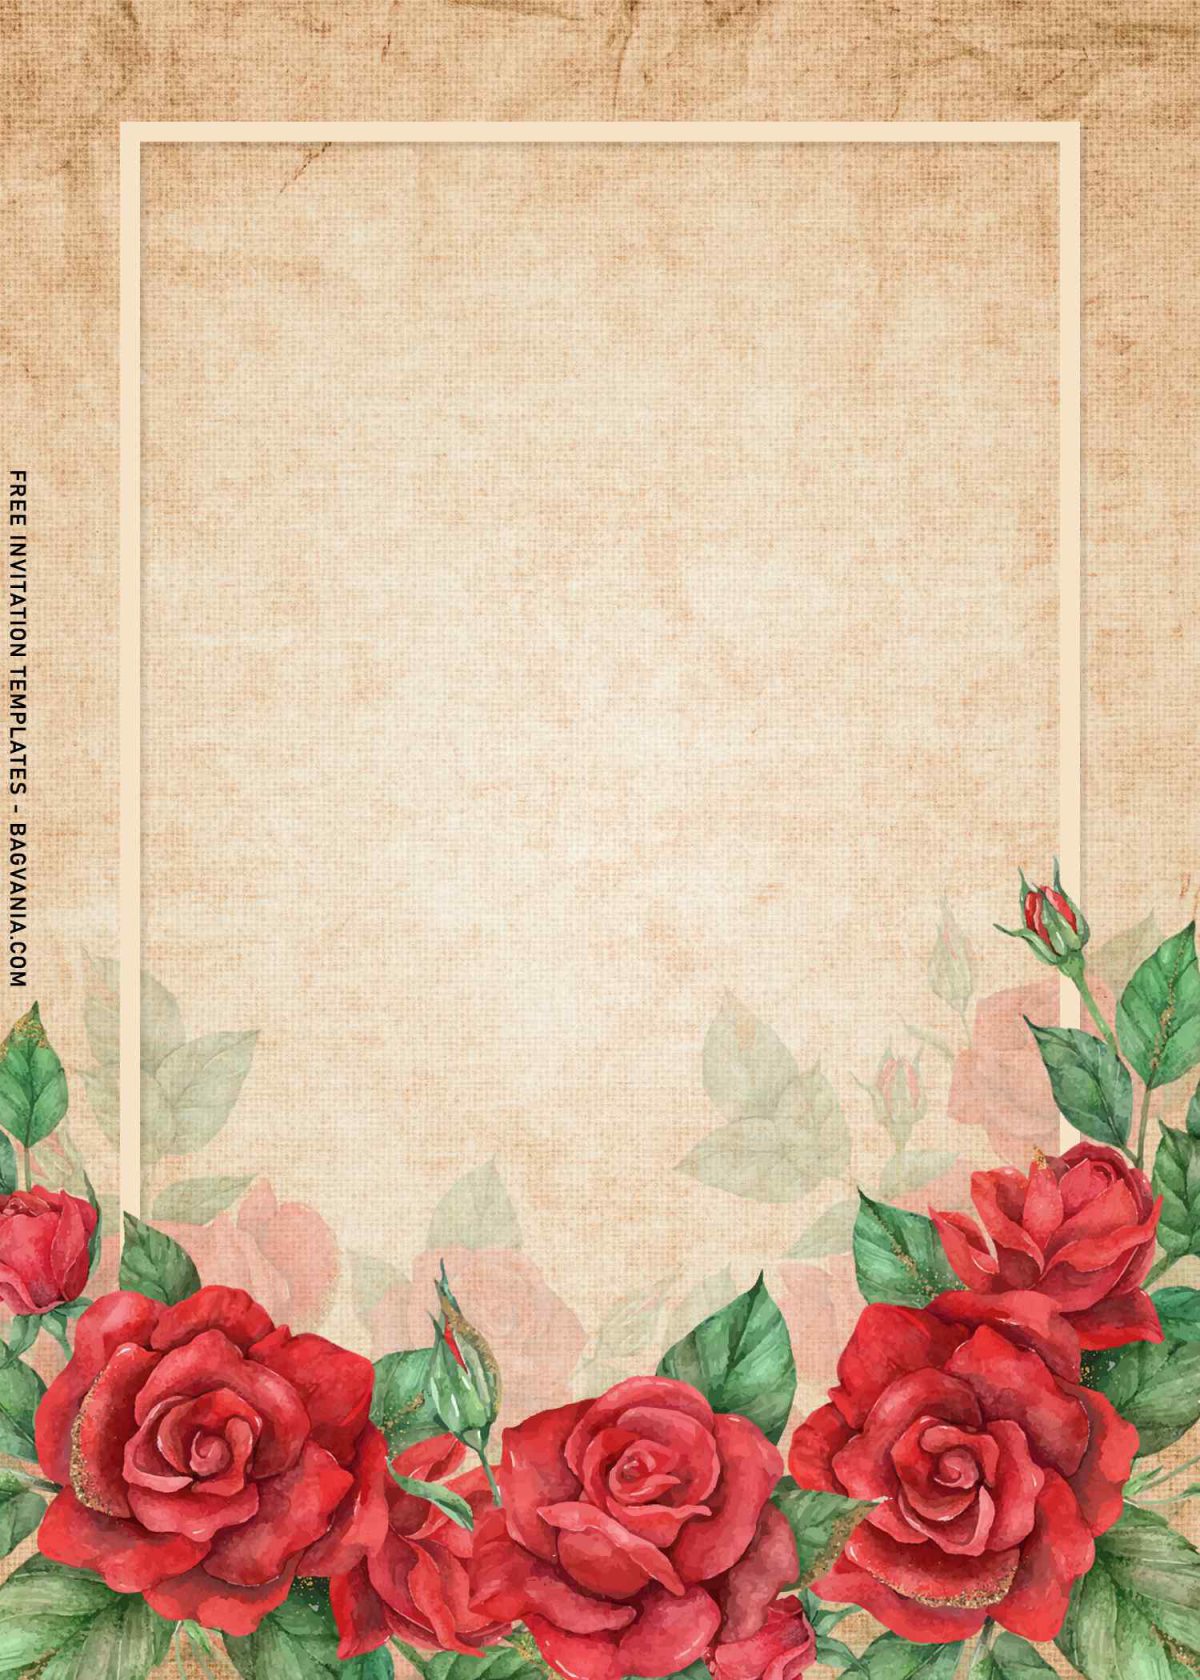 7+ Attractive Vintage Floral Birthday Invitation Templates with magnificent red rose